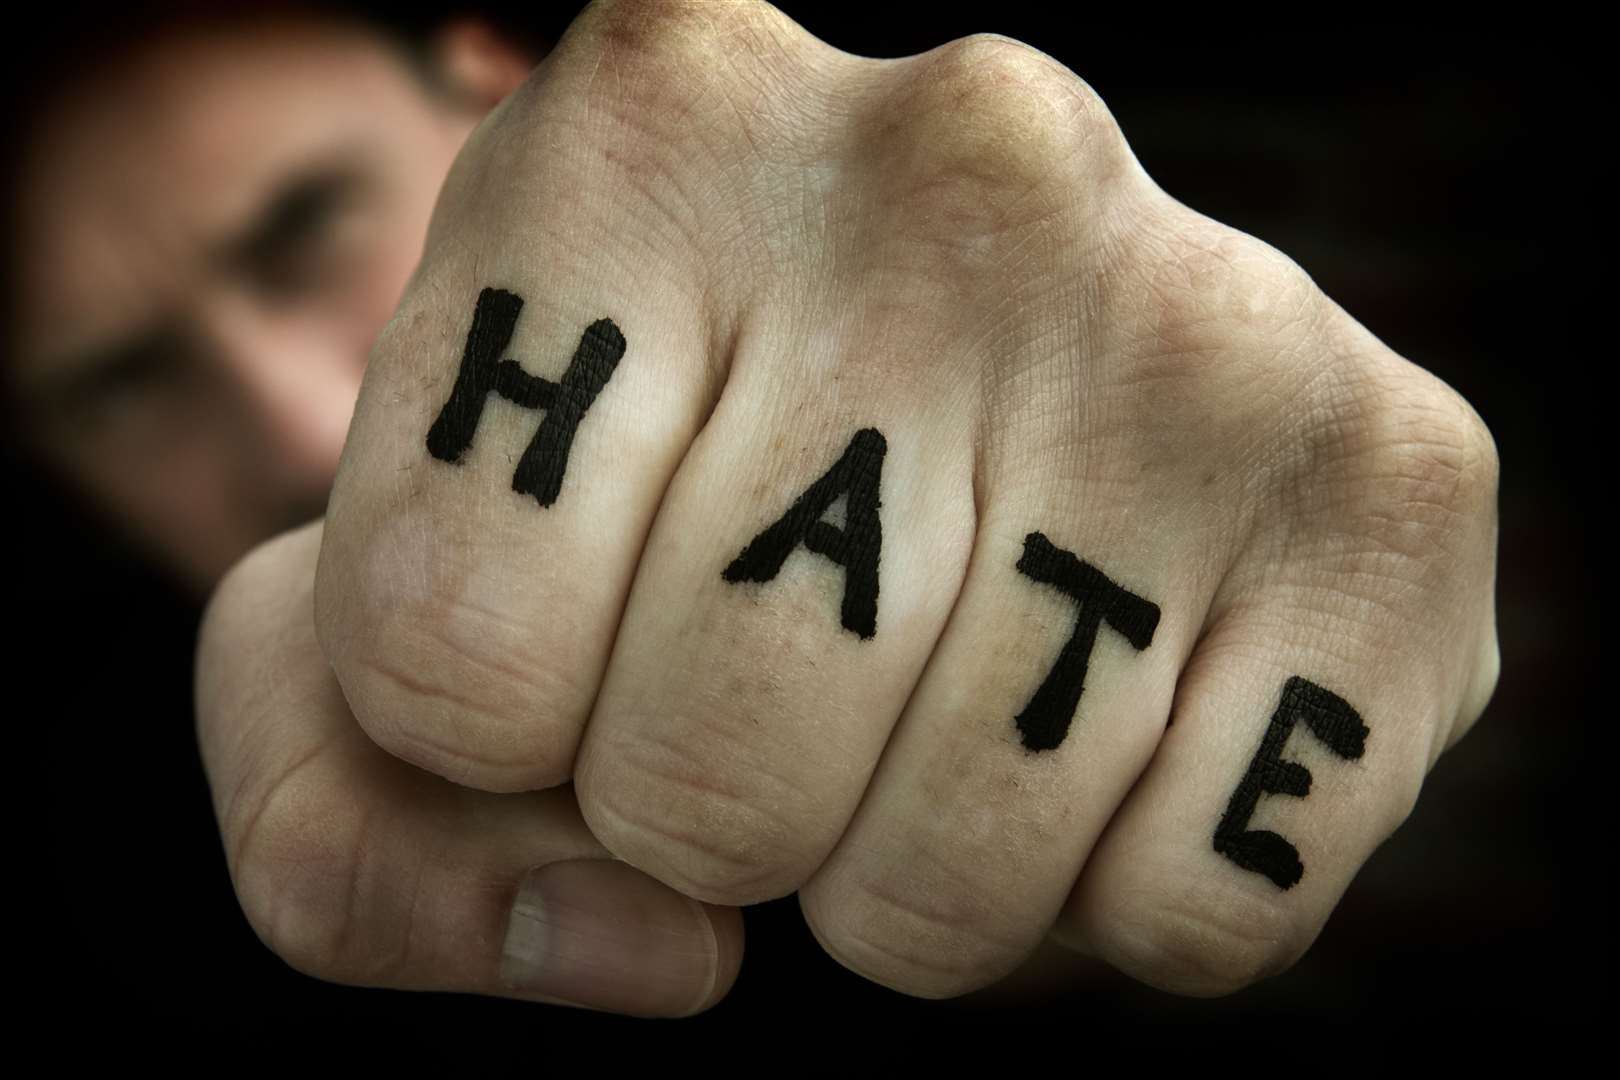 Kent Police said all hate crimes will "simply not be tolerated". Picture: Thinkstock images